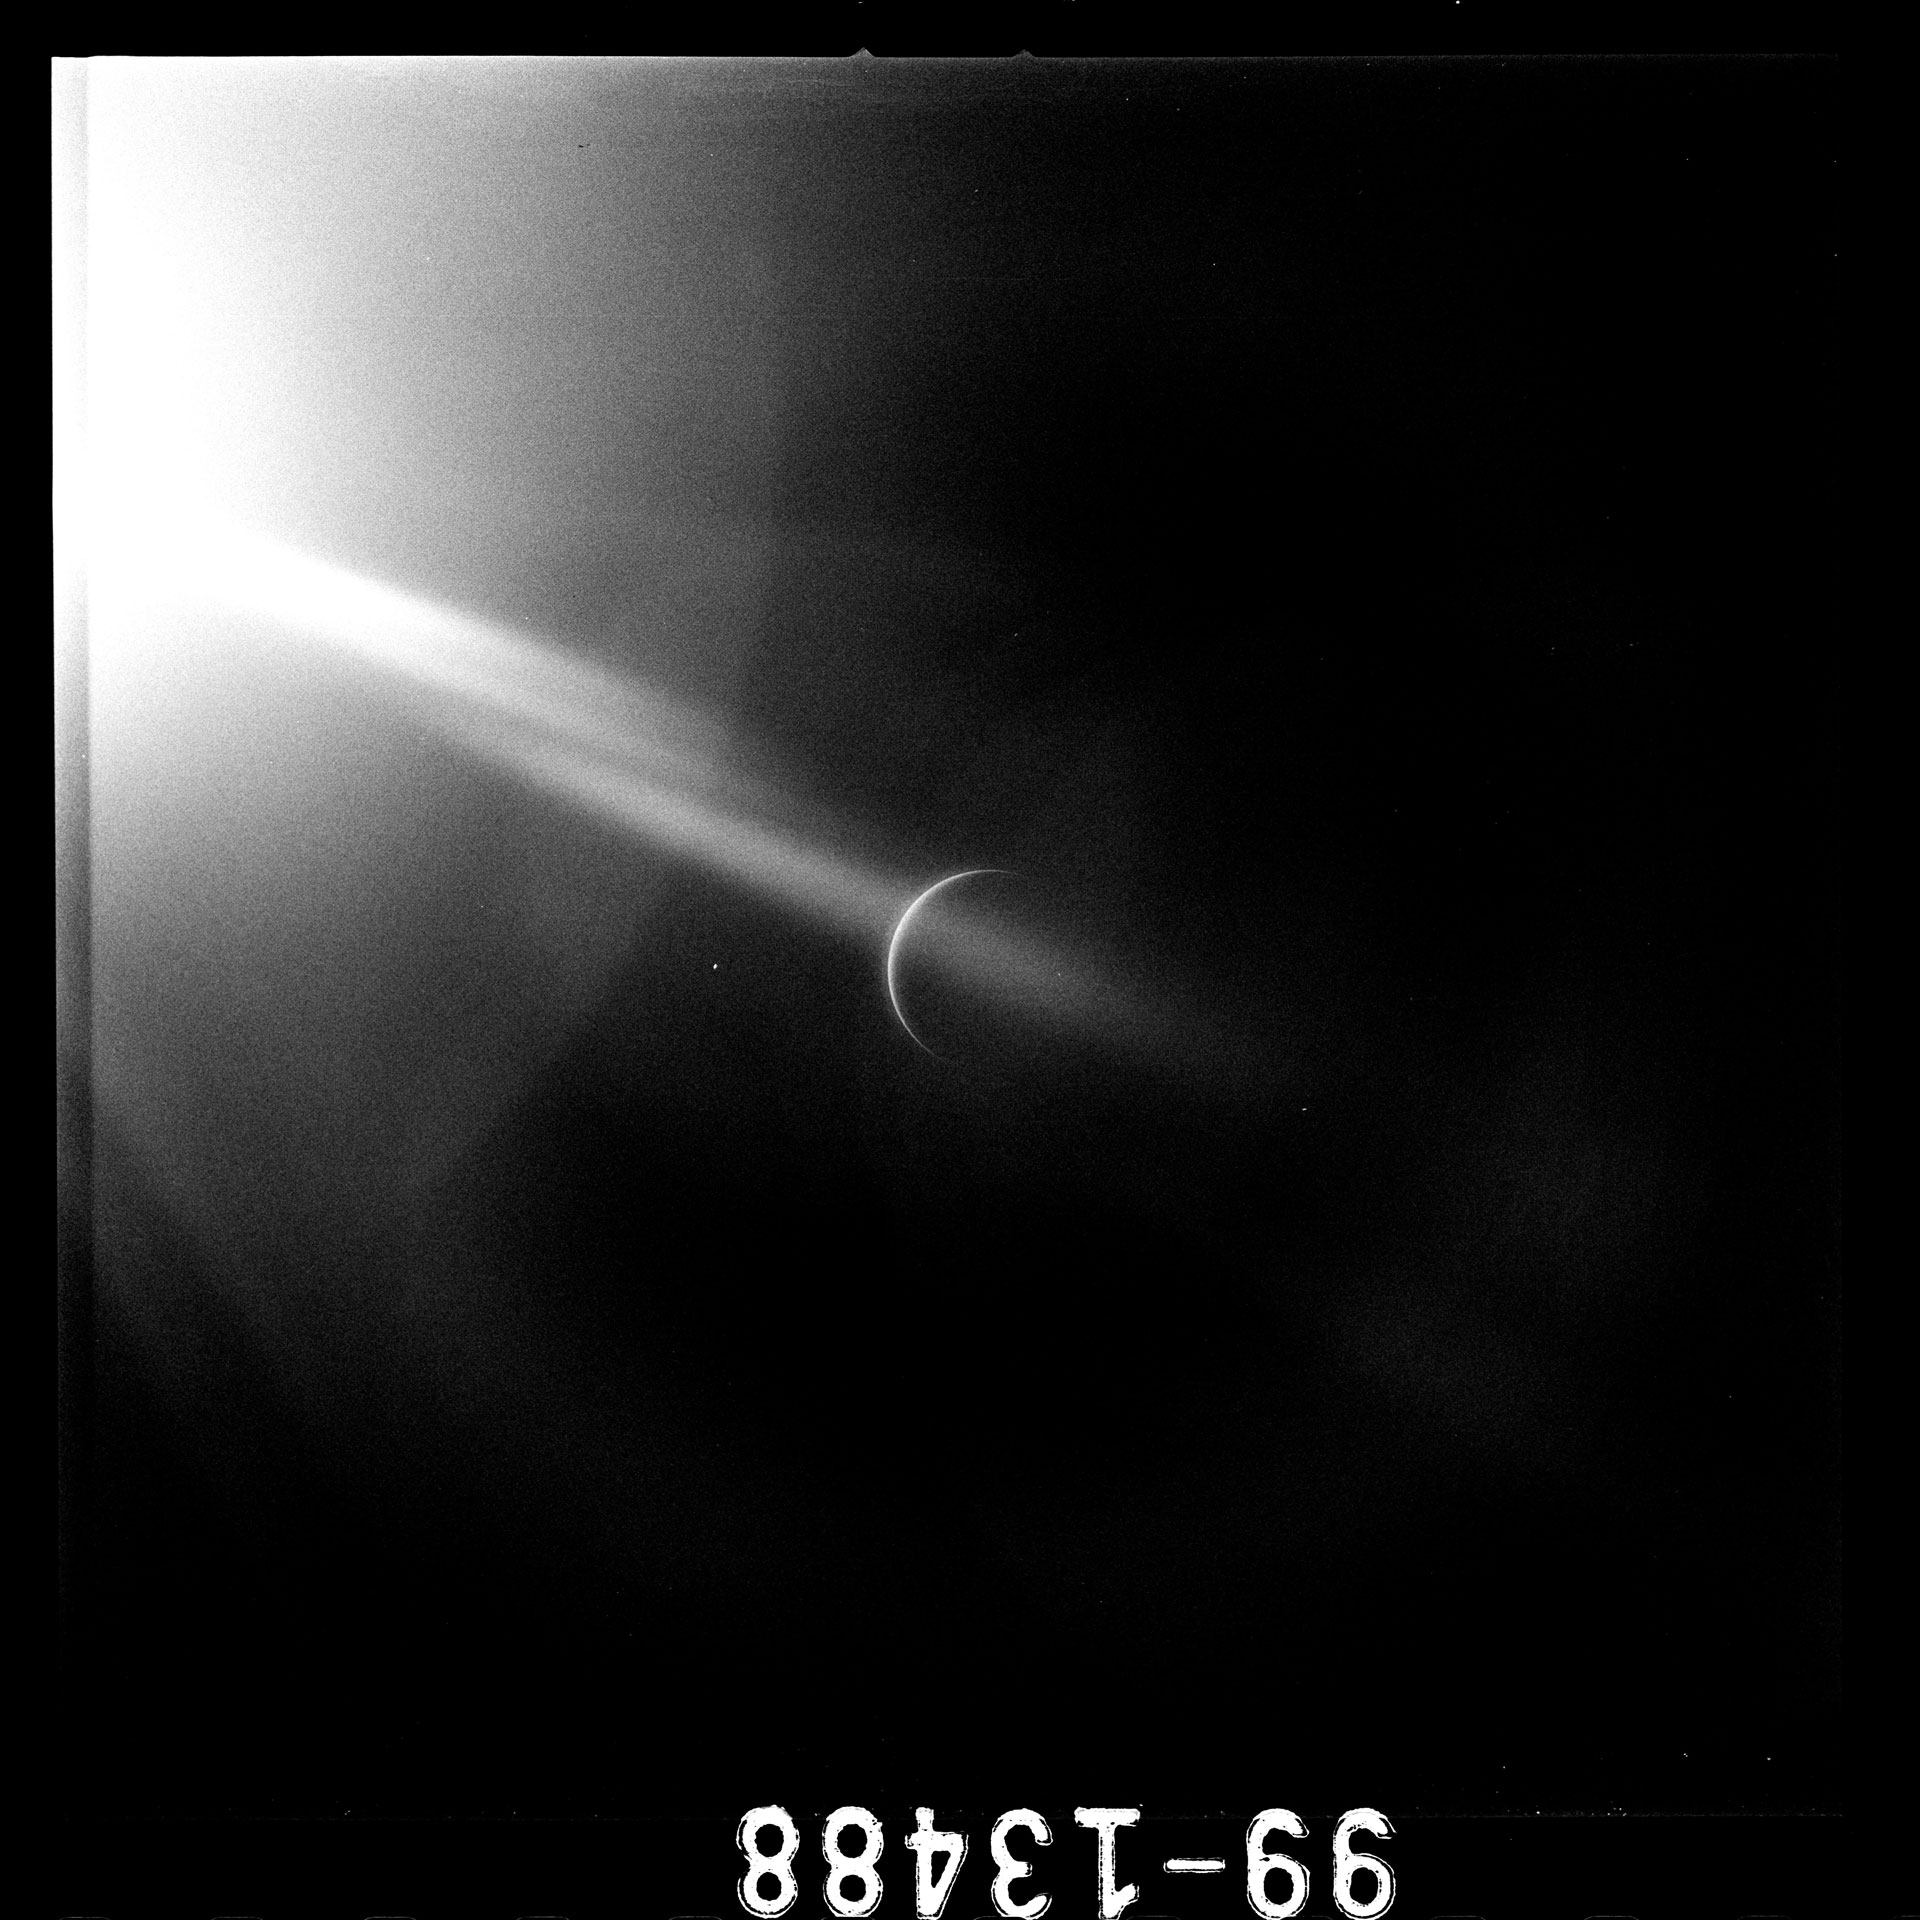 UV photograph (AS15-99-13488) shot by Apollo 15 Astronaut Al Worden of a crescent Earth seen during the return home from the Moon - Apollo 15 Mission, August 4th, 1971